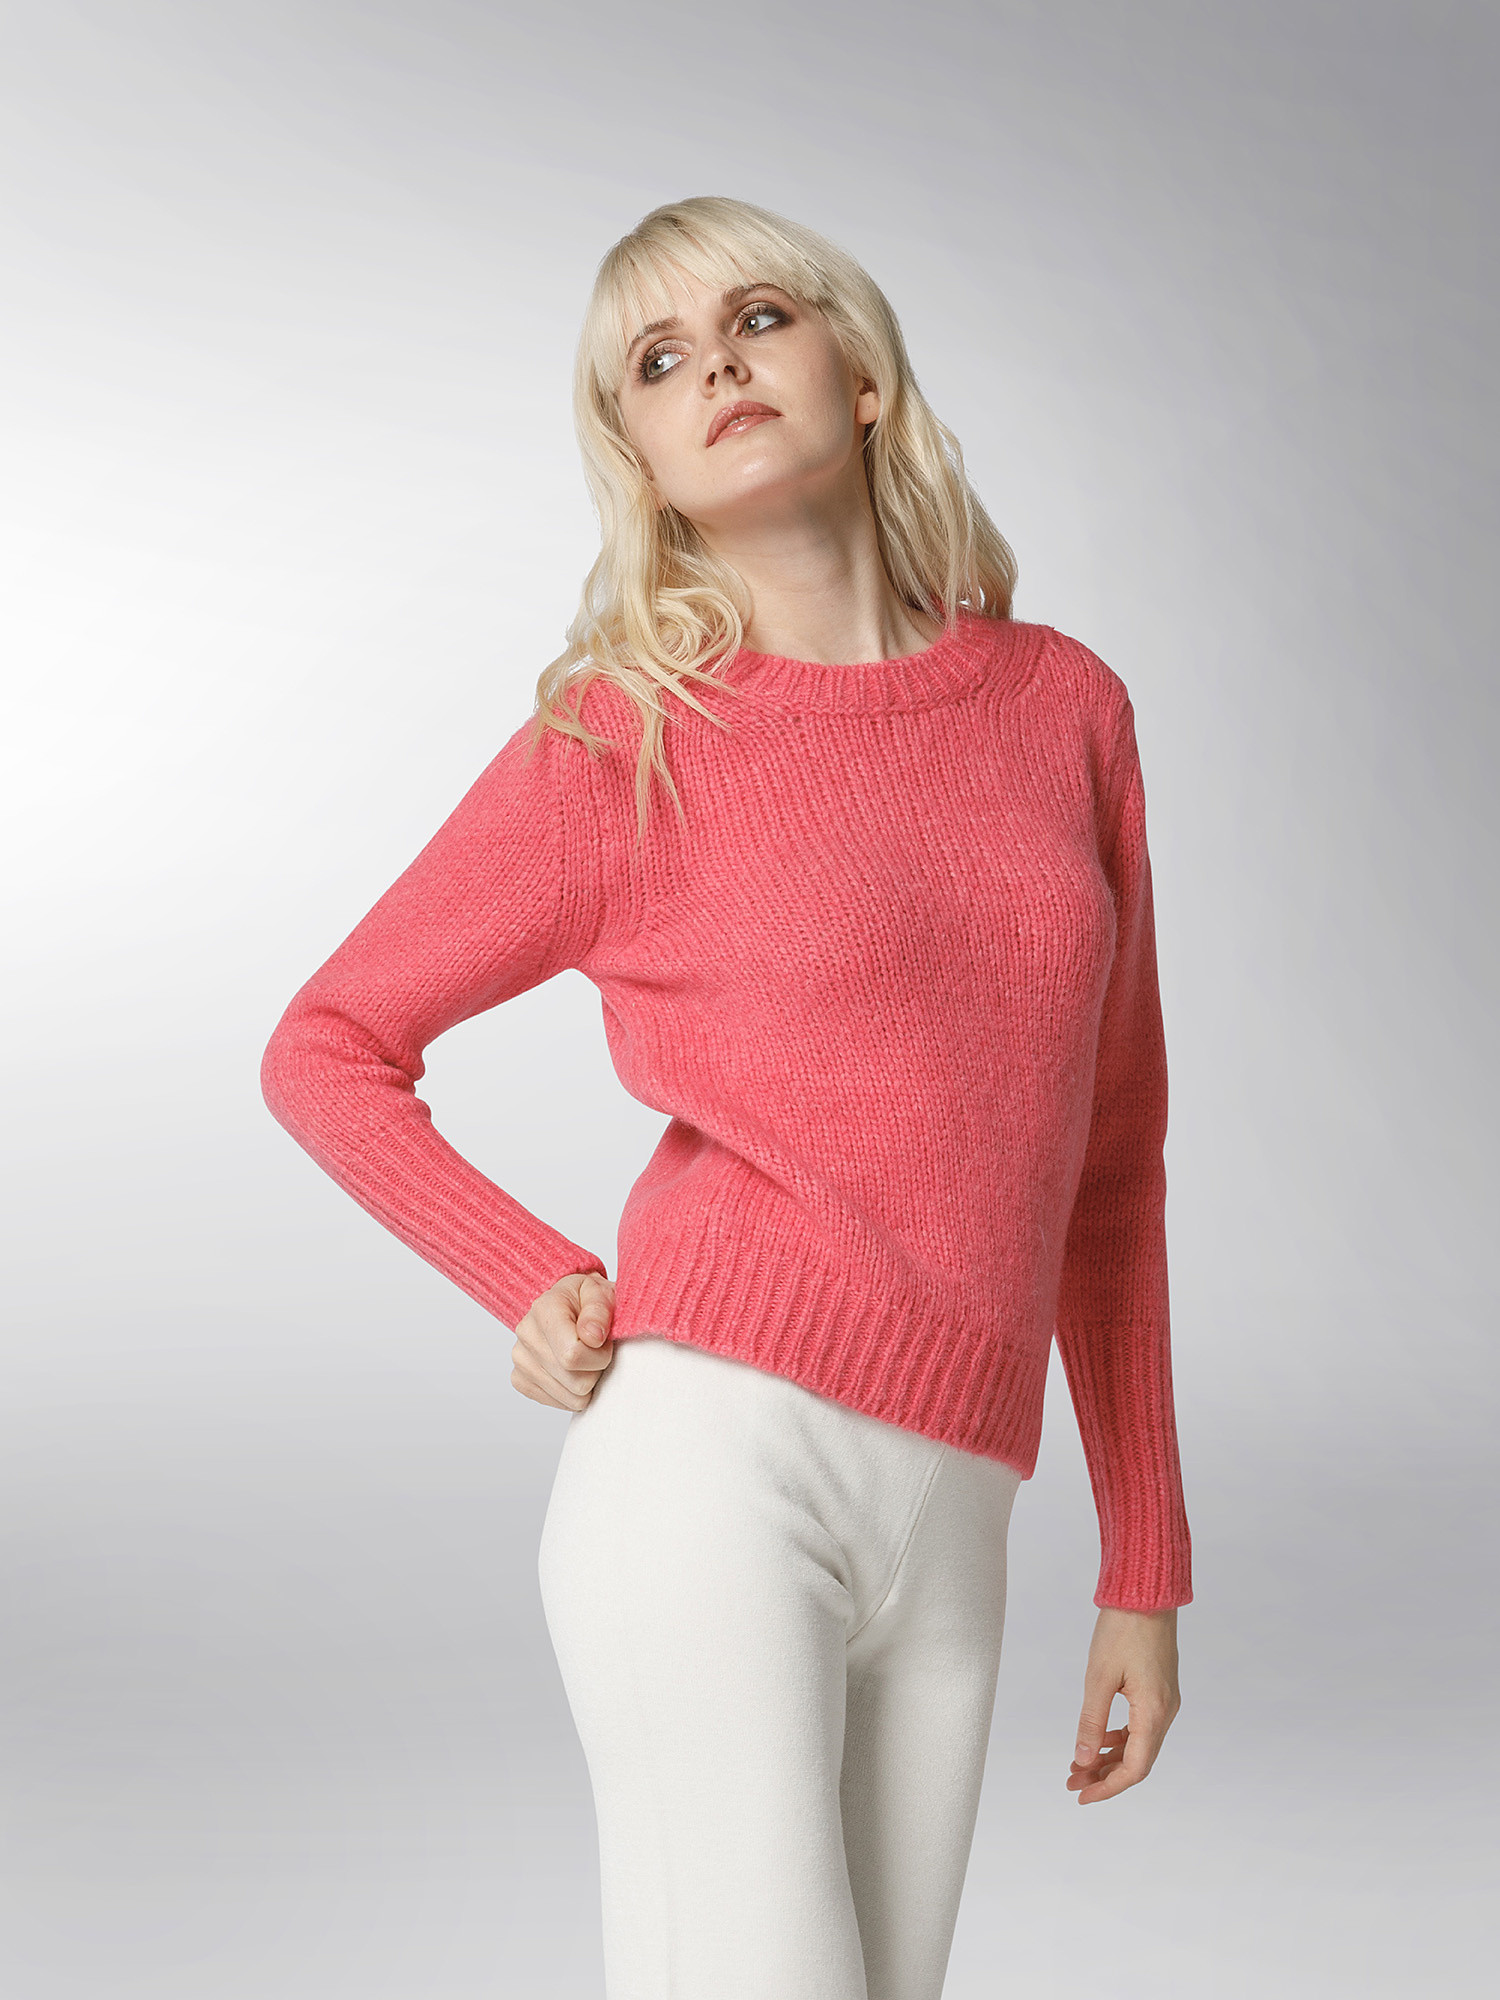 K Collection - Crewneck sweater, Pink Fuchsia, large image number 4